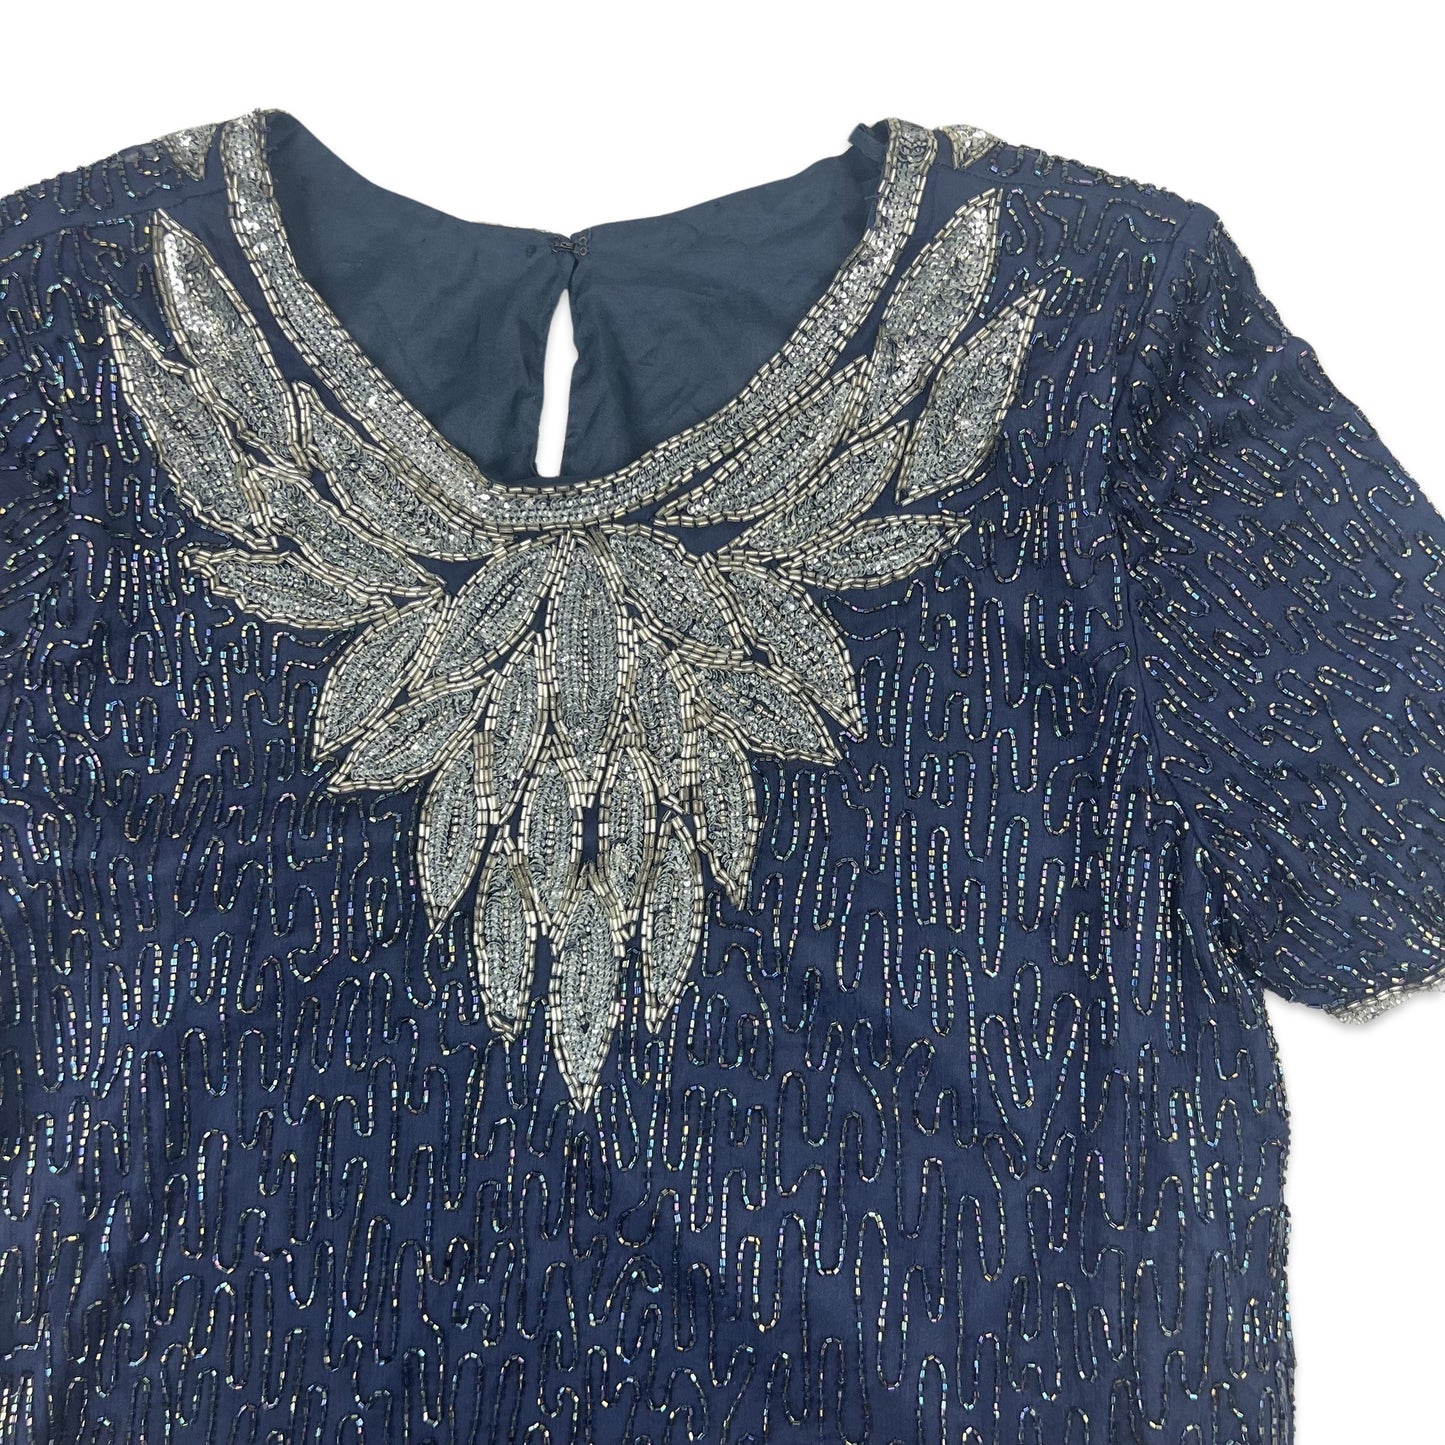 Vintage 80s Oversized Boxy Sequin Blouse Blue Silver 12 14